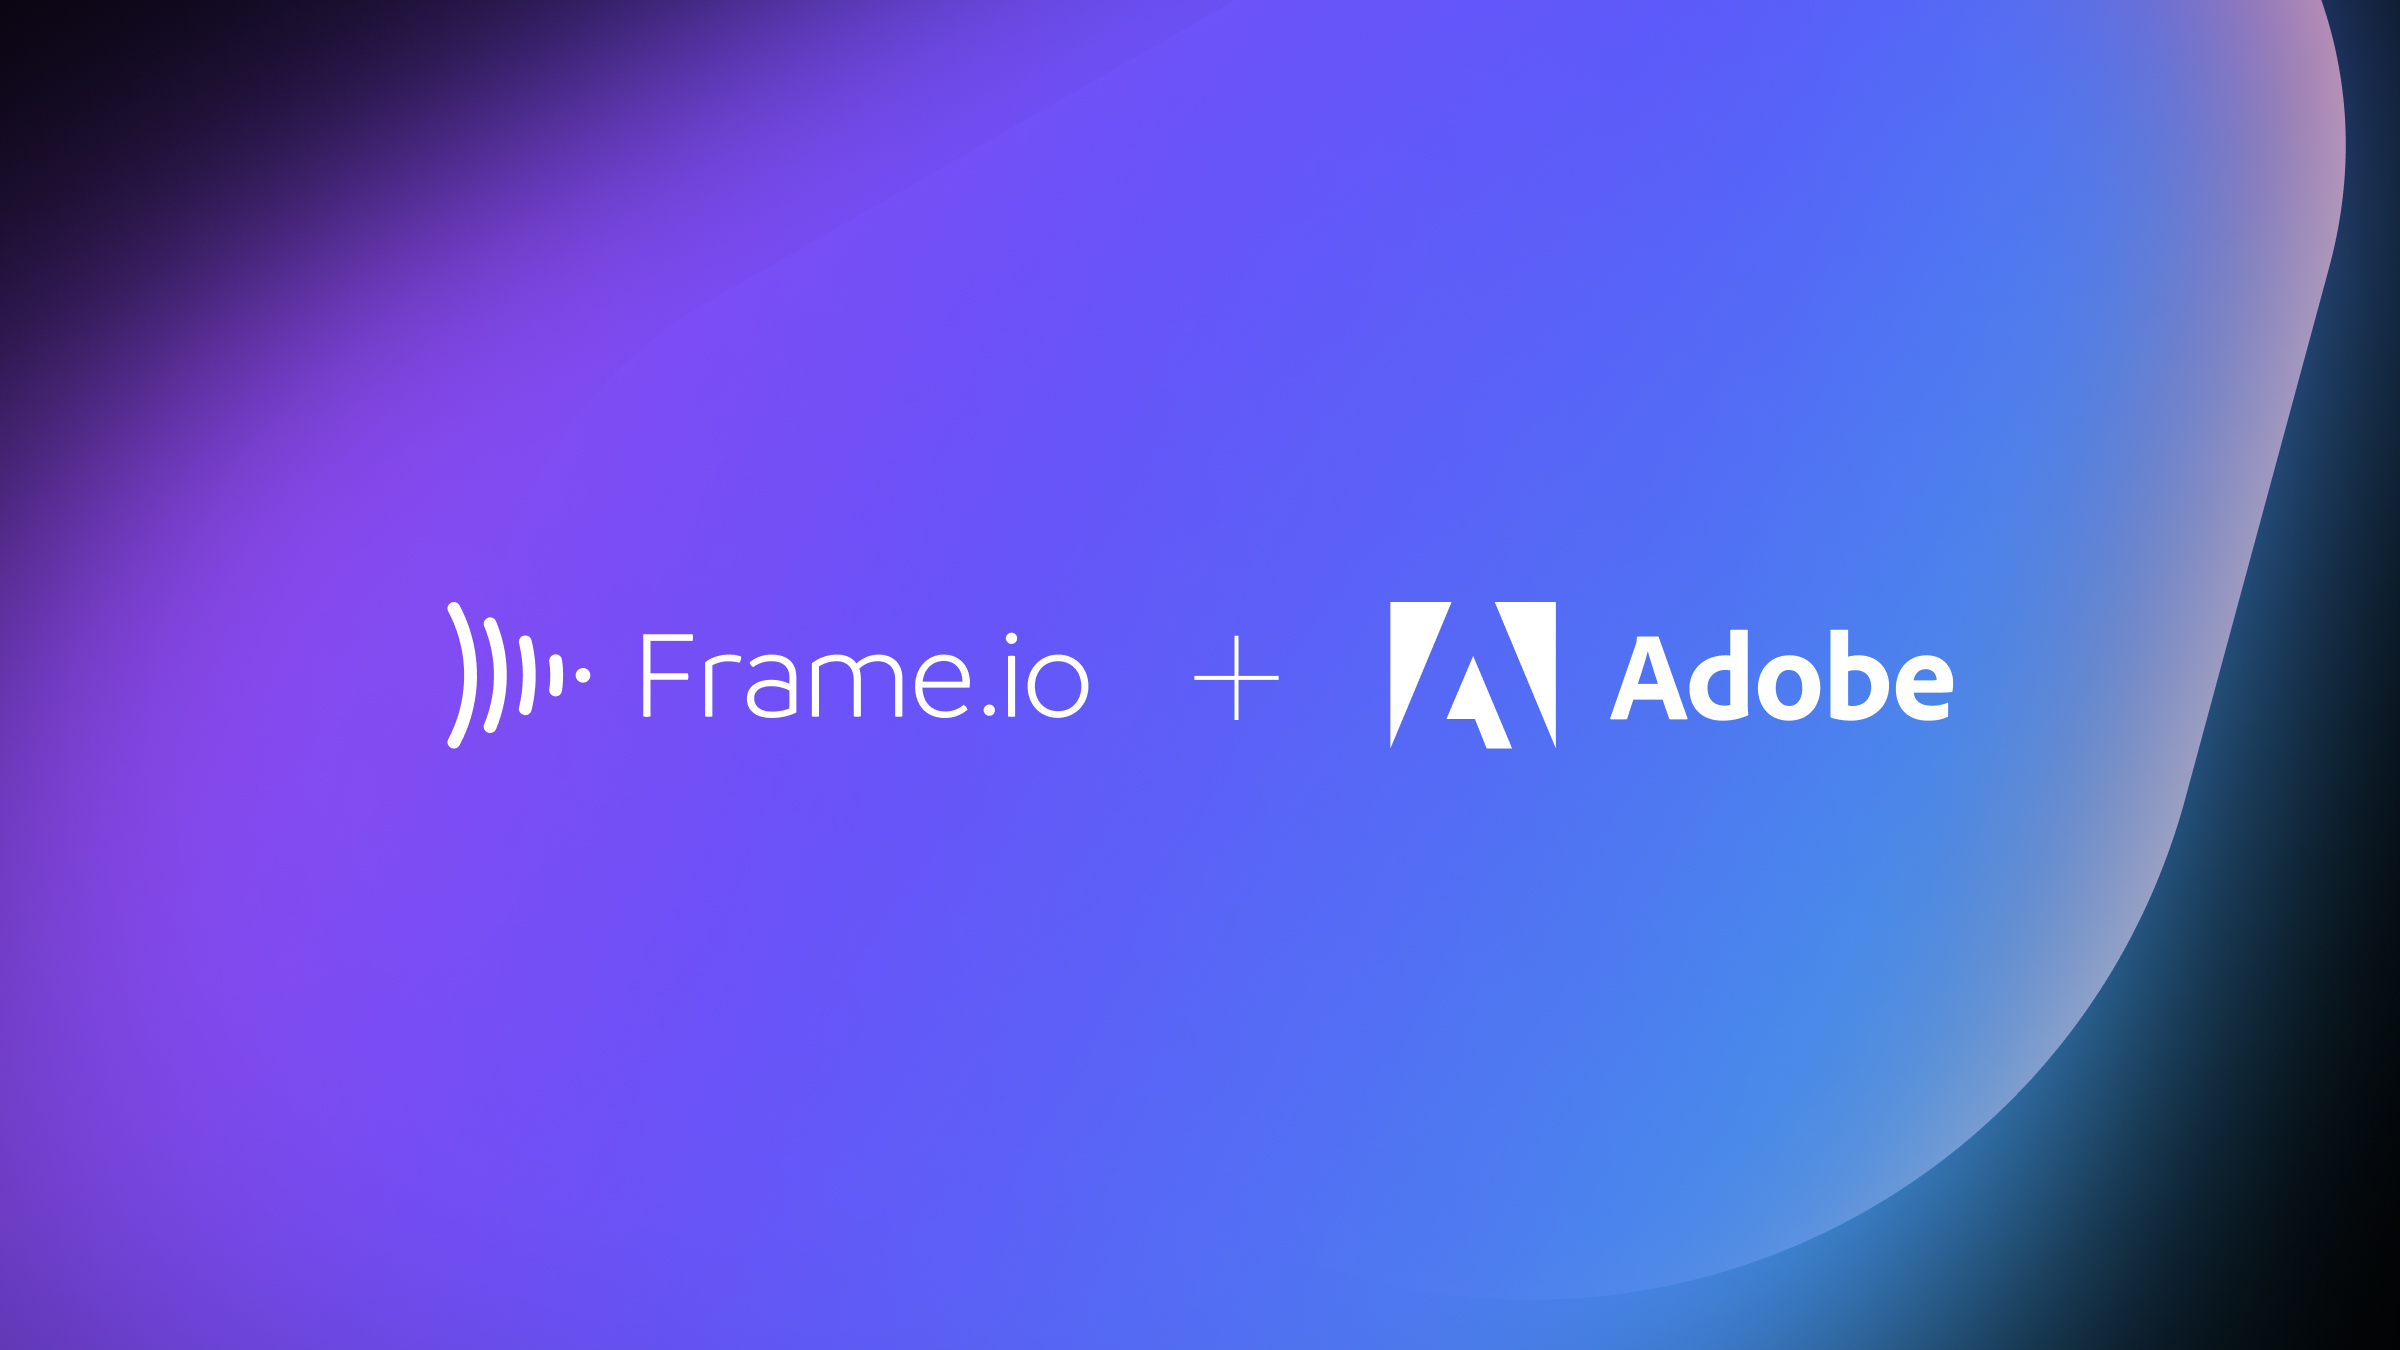 Frame.io Is Joining Forces with Adobe